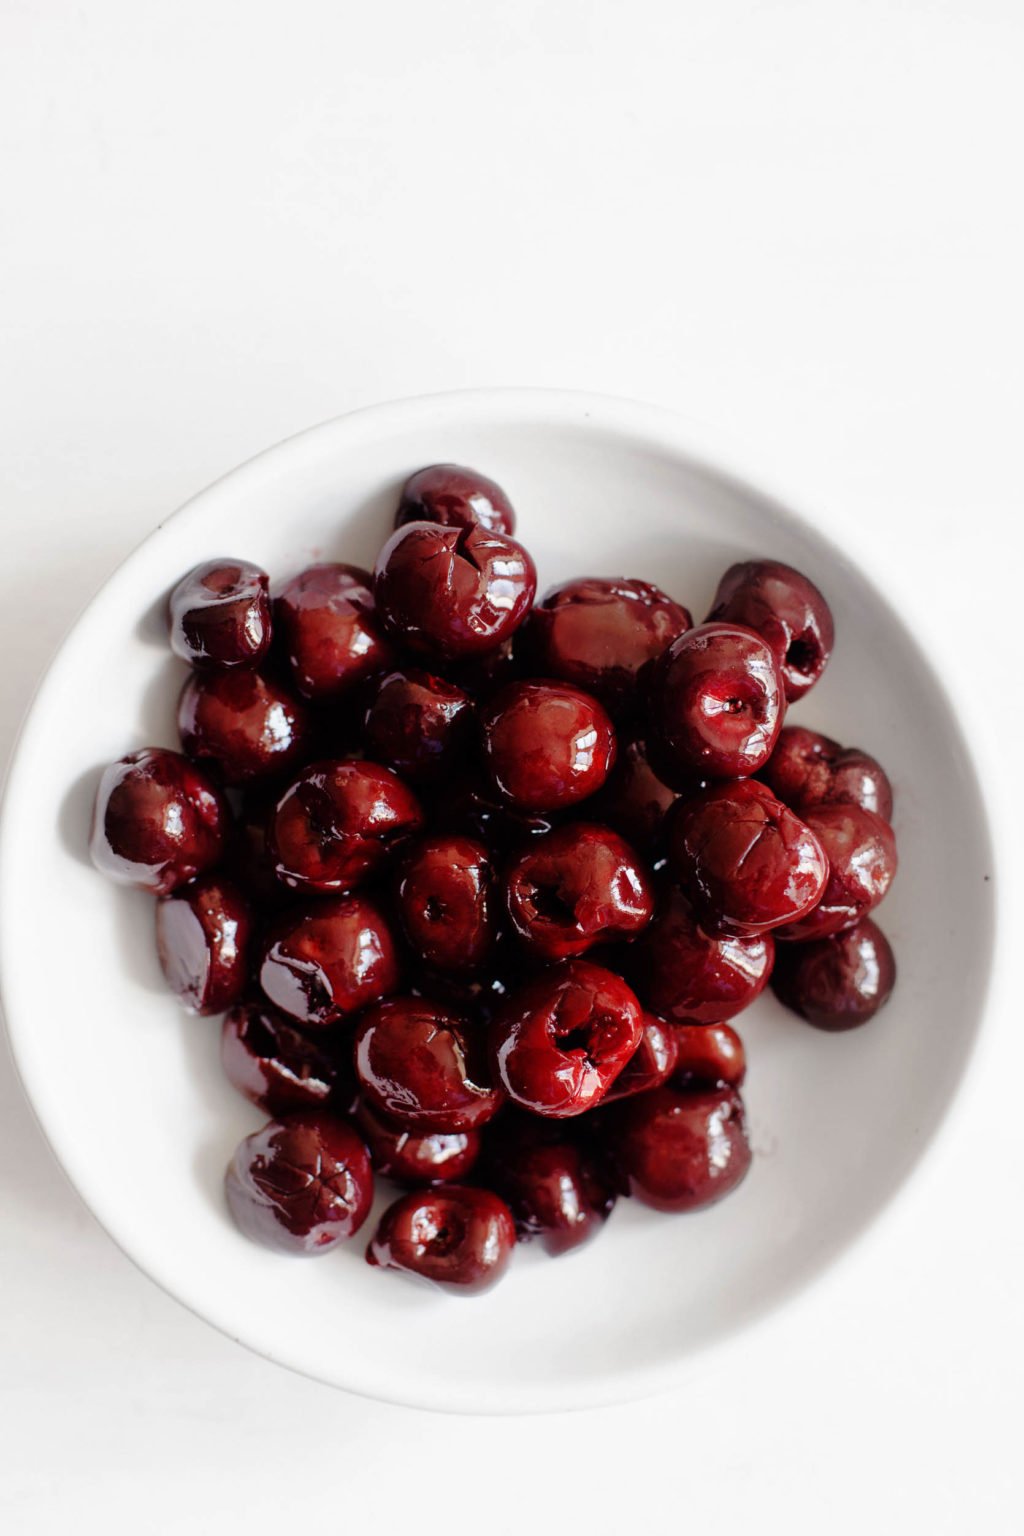 A bowl of plump and shiny dark, sweet cherries.